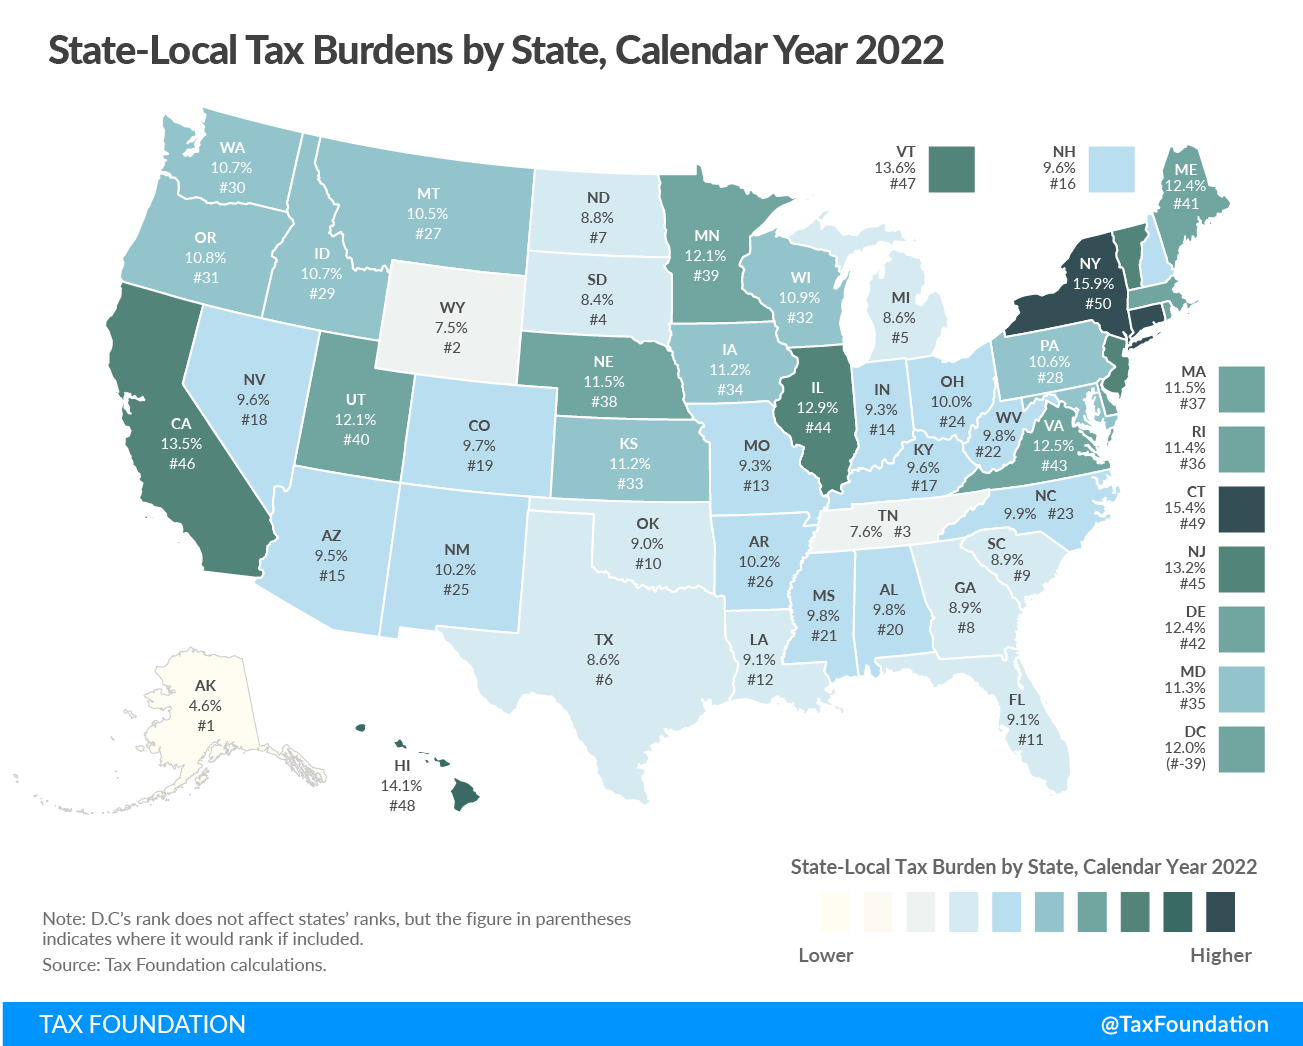 State-local Tax Burdens by State, Calendar Year 2022 with New Mexico ranking 25